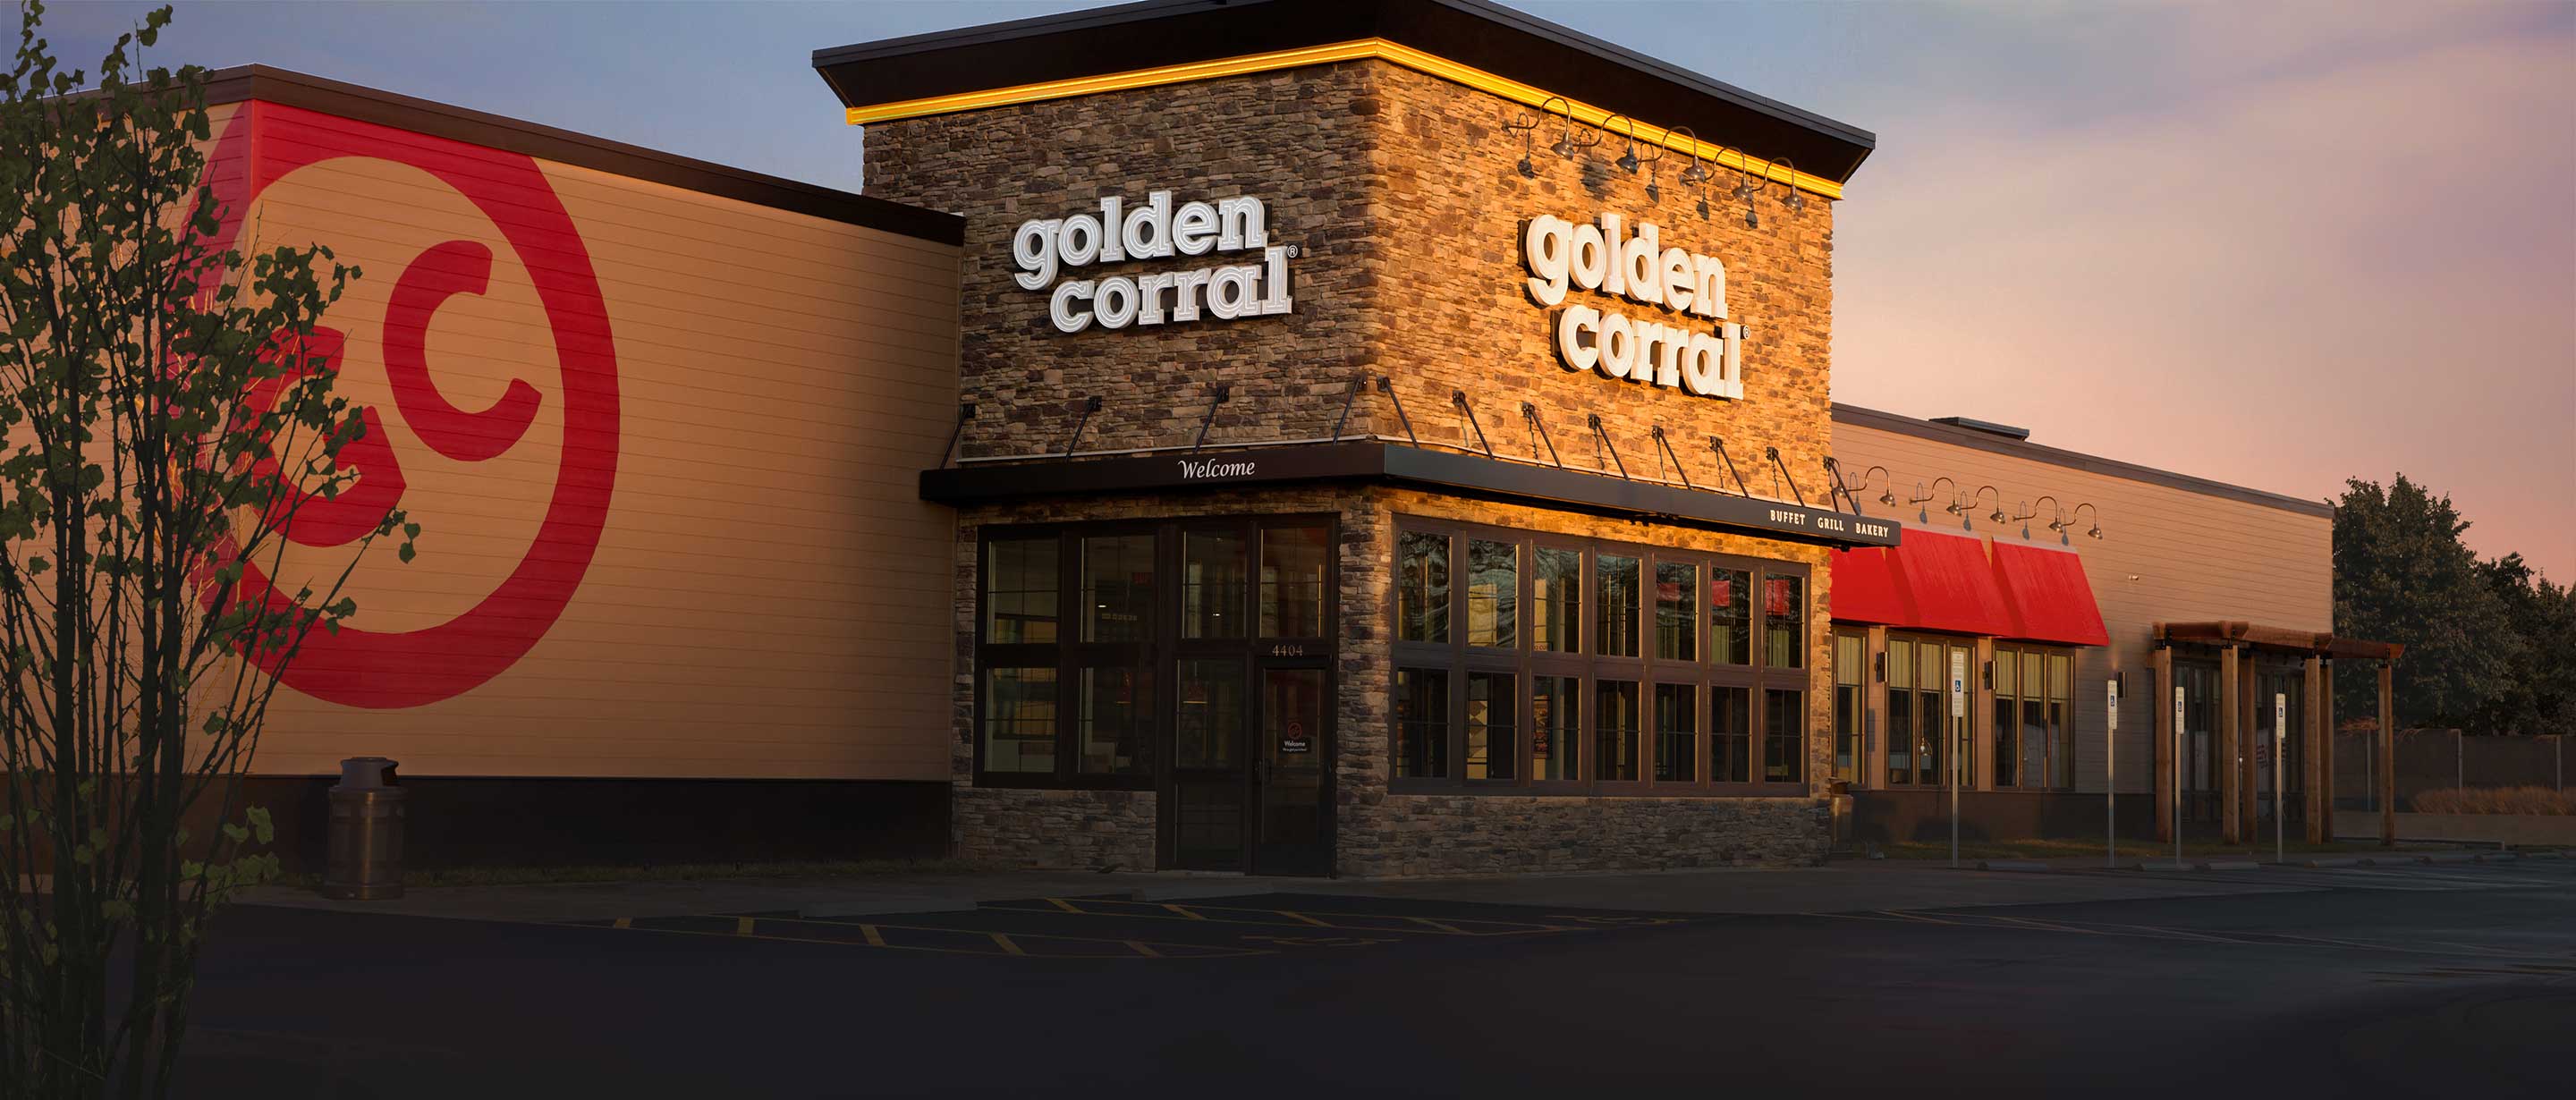 Frequently Asked Questions Golden Corral Buffet Restaurants - roblox golden corral